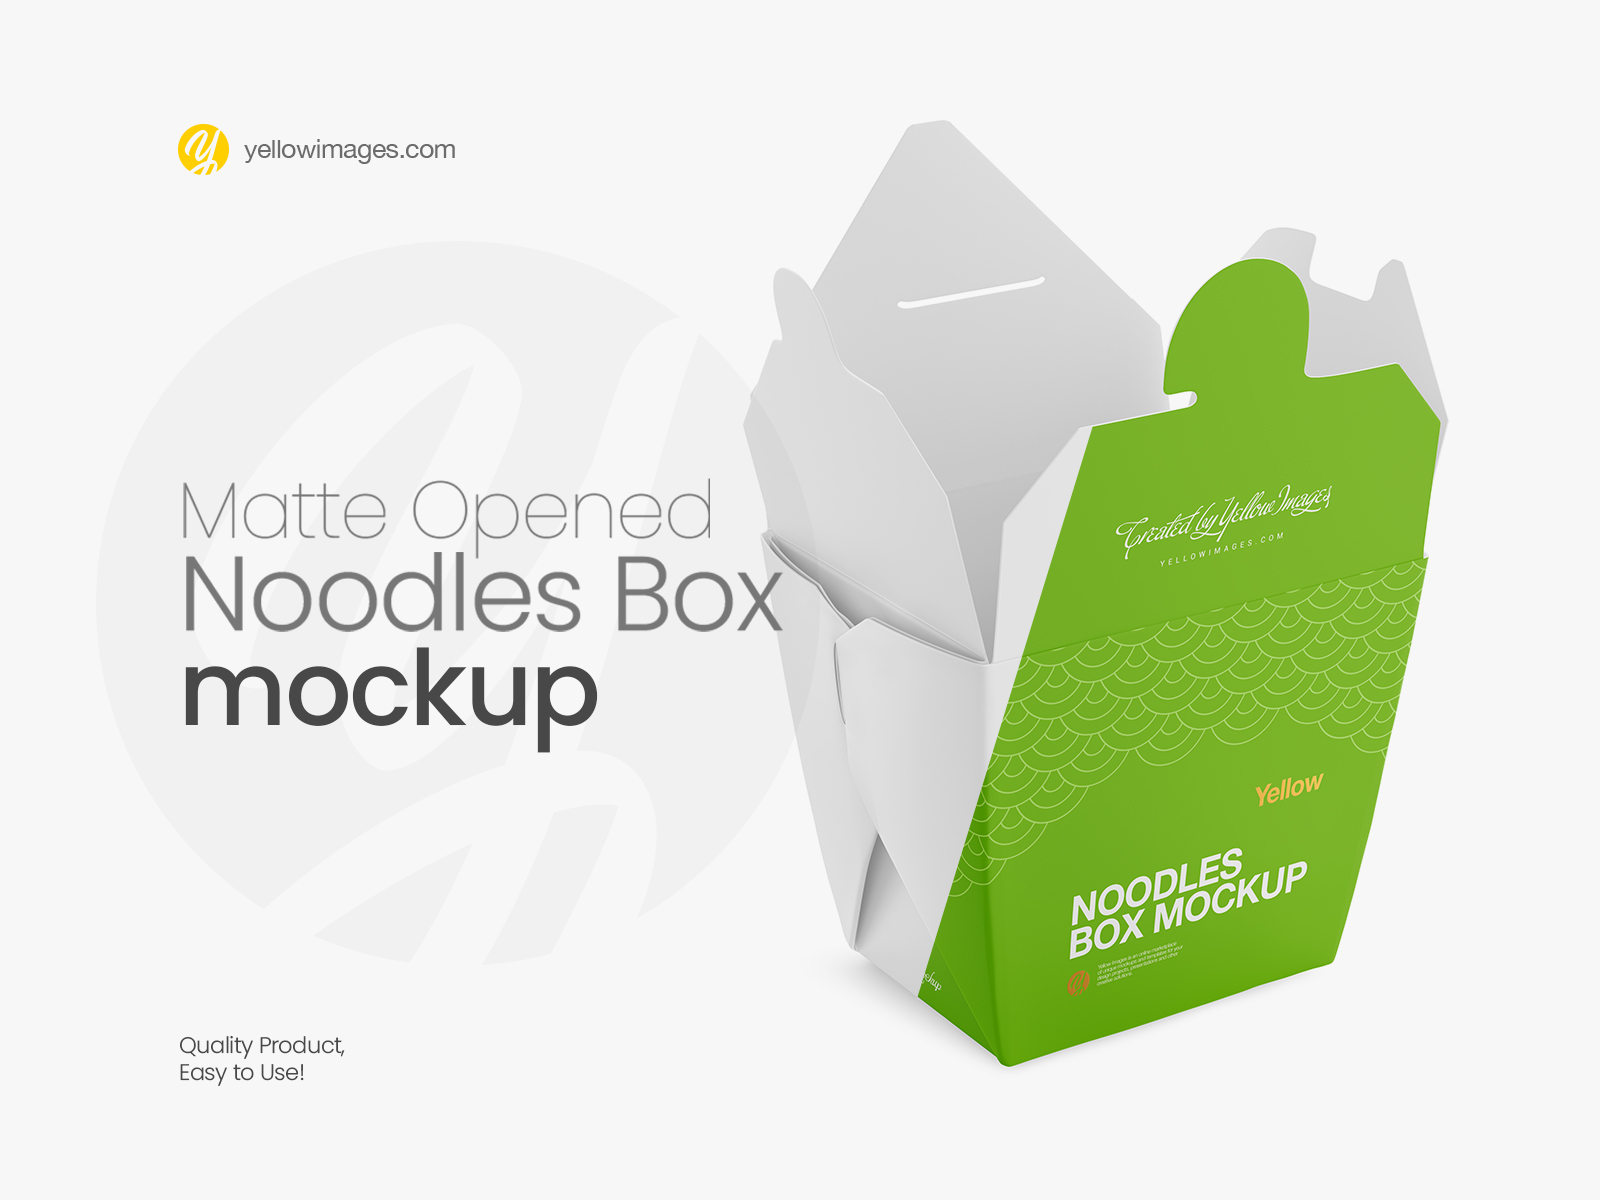 Download Opened Matte Noodles Box Mockup - Halfside View by Dmytro Ovcharenko on Dribbble